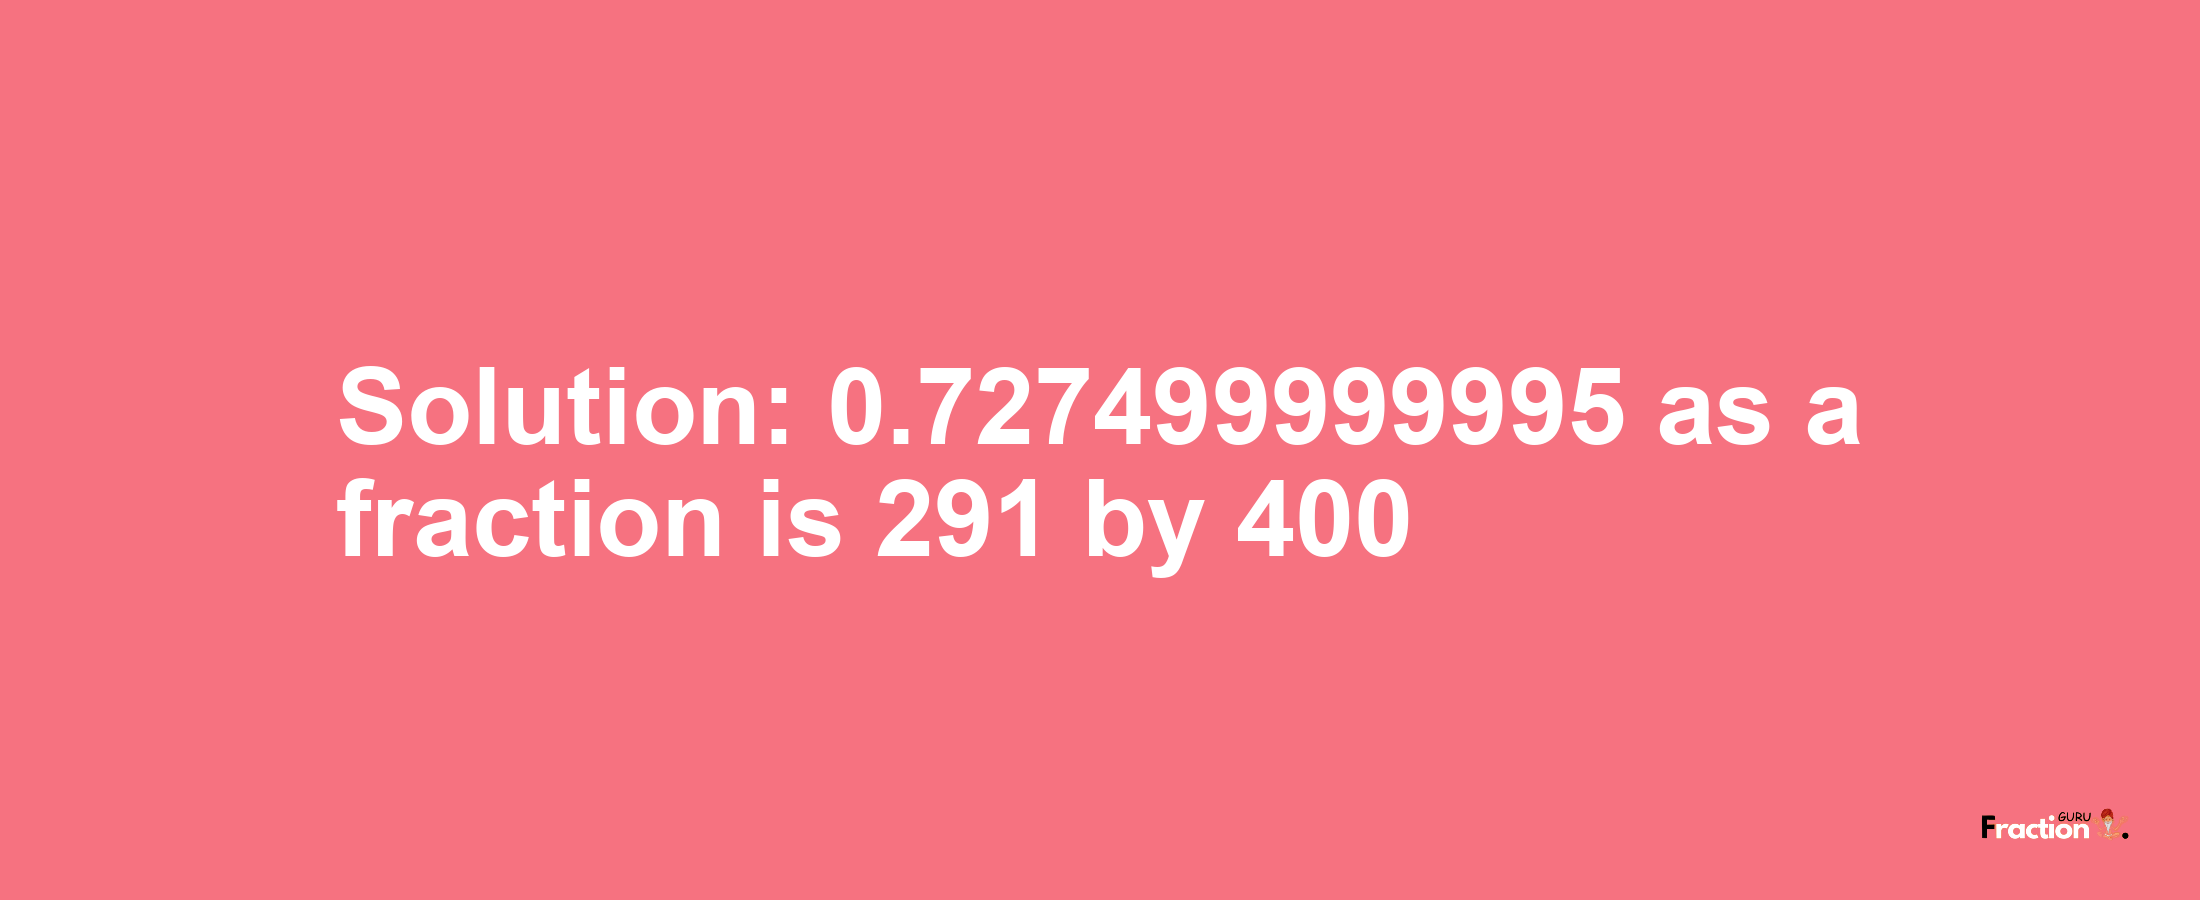 Solution:0.727499999995 as a fraction is 291/400